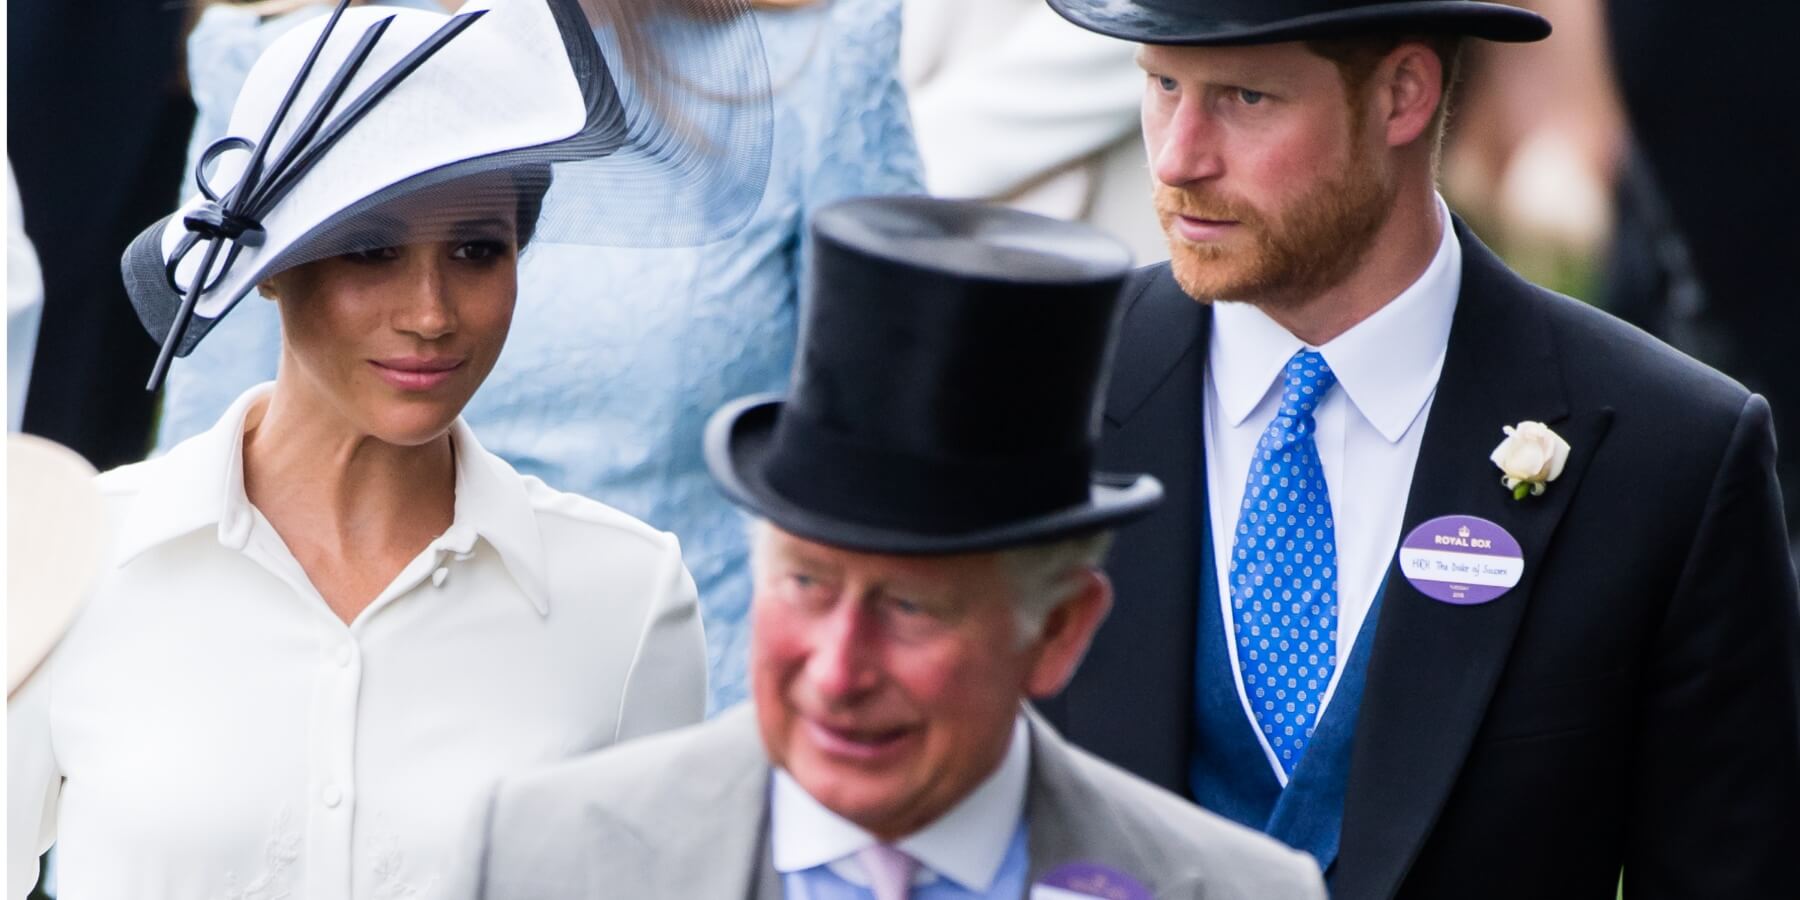 Meghan Markle, King Charles, and Prince Harry attend Royal Ascot Day 1 at Ascot Racecourse on June 19, 2018, in Ascot, United Kingdom.